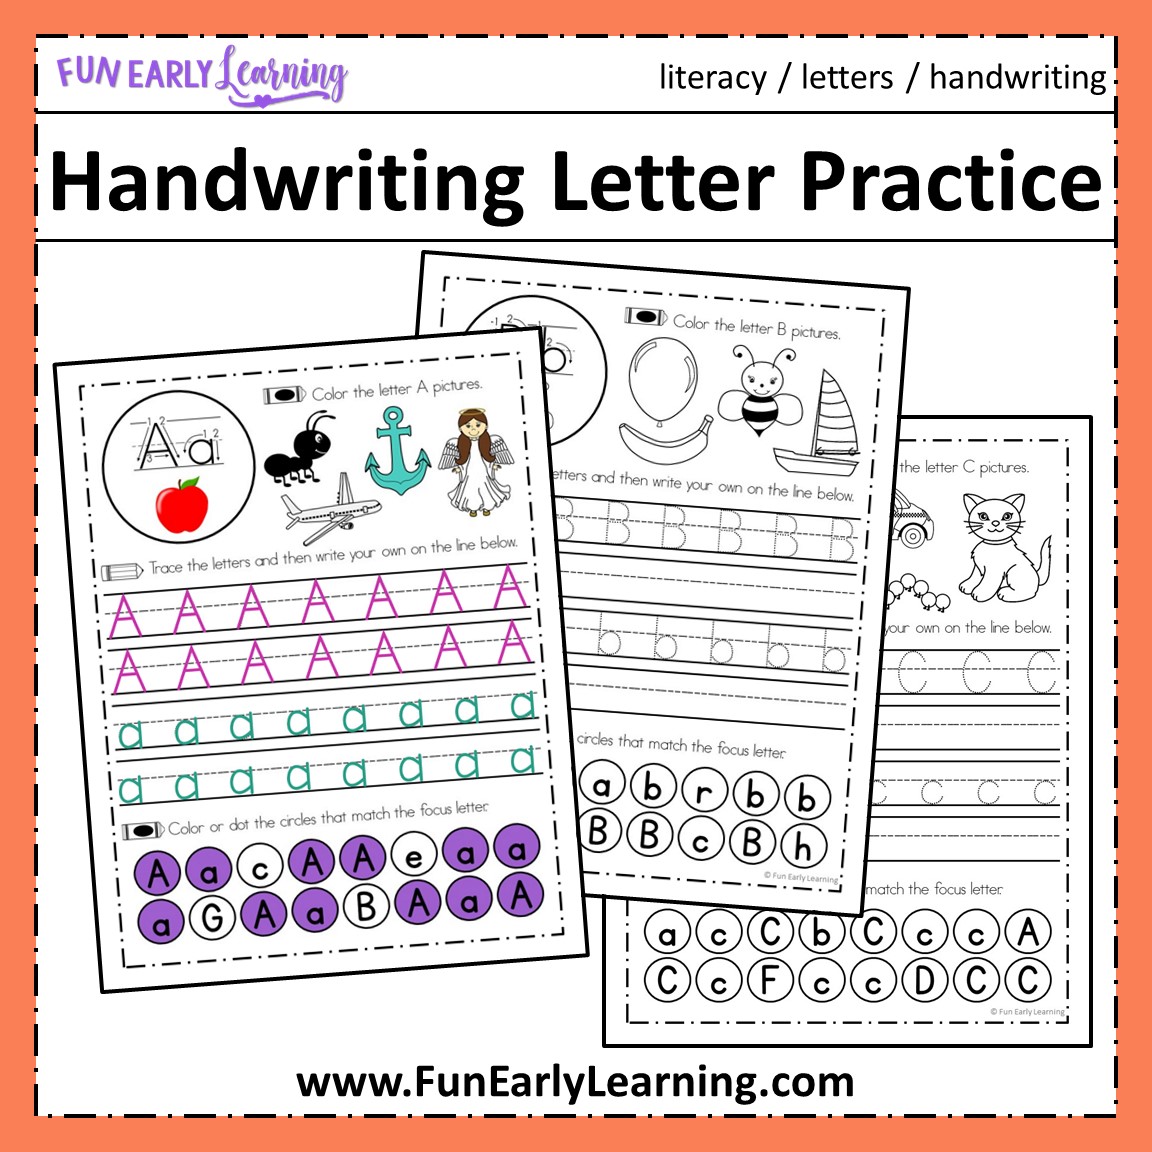 Handwriting Letter Practice – Fun Early Learning